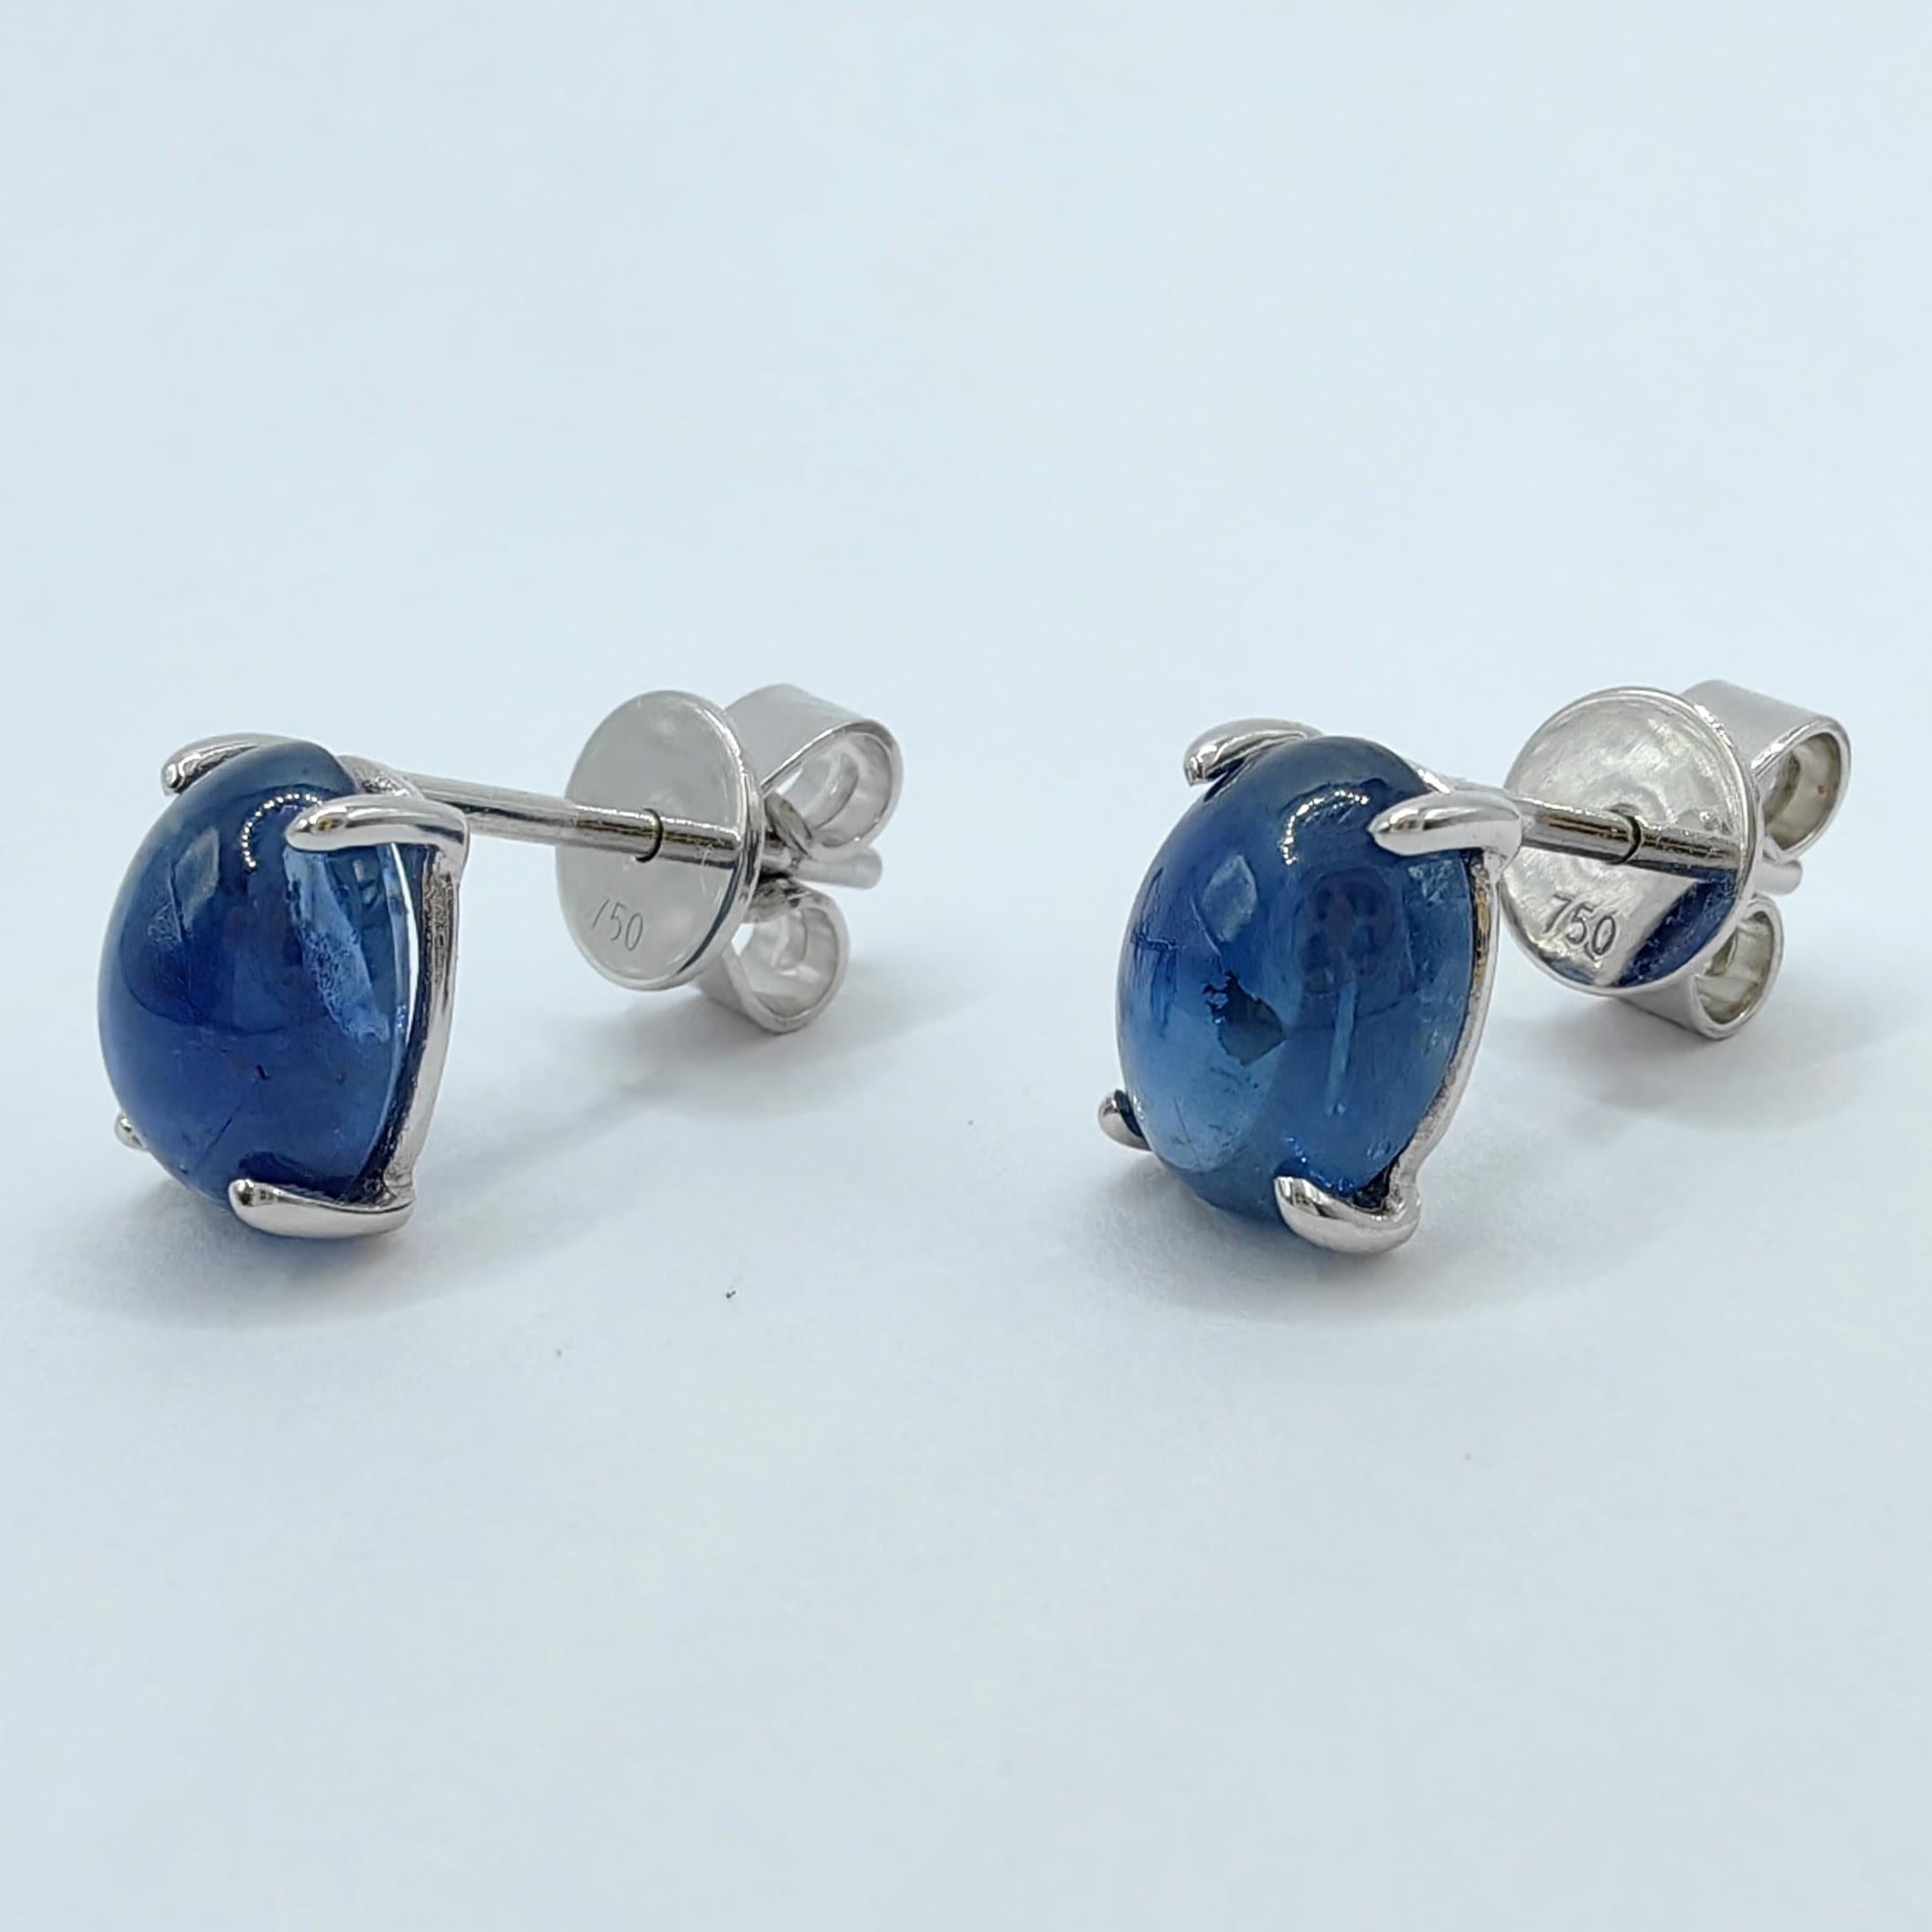 Contemporary Matched 4.24 Carat 8x6mm Cabochon Blue Sapphire Stud Earrings in 18K White Gold